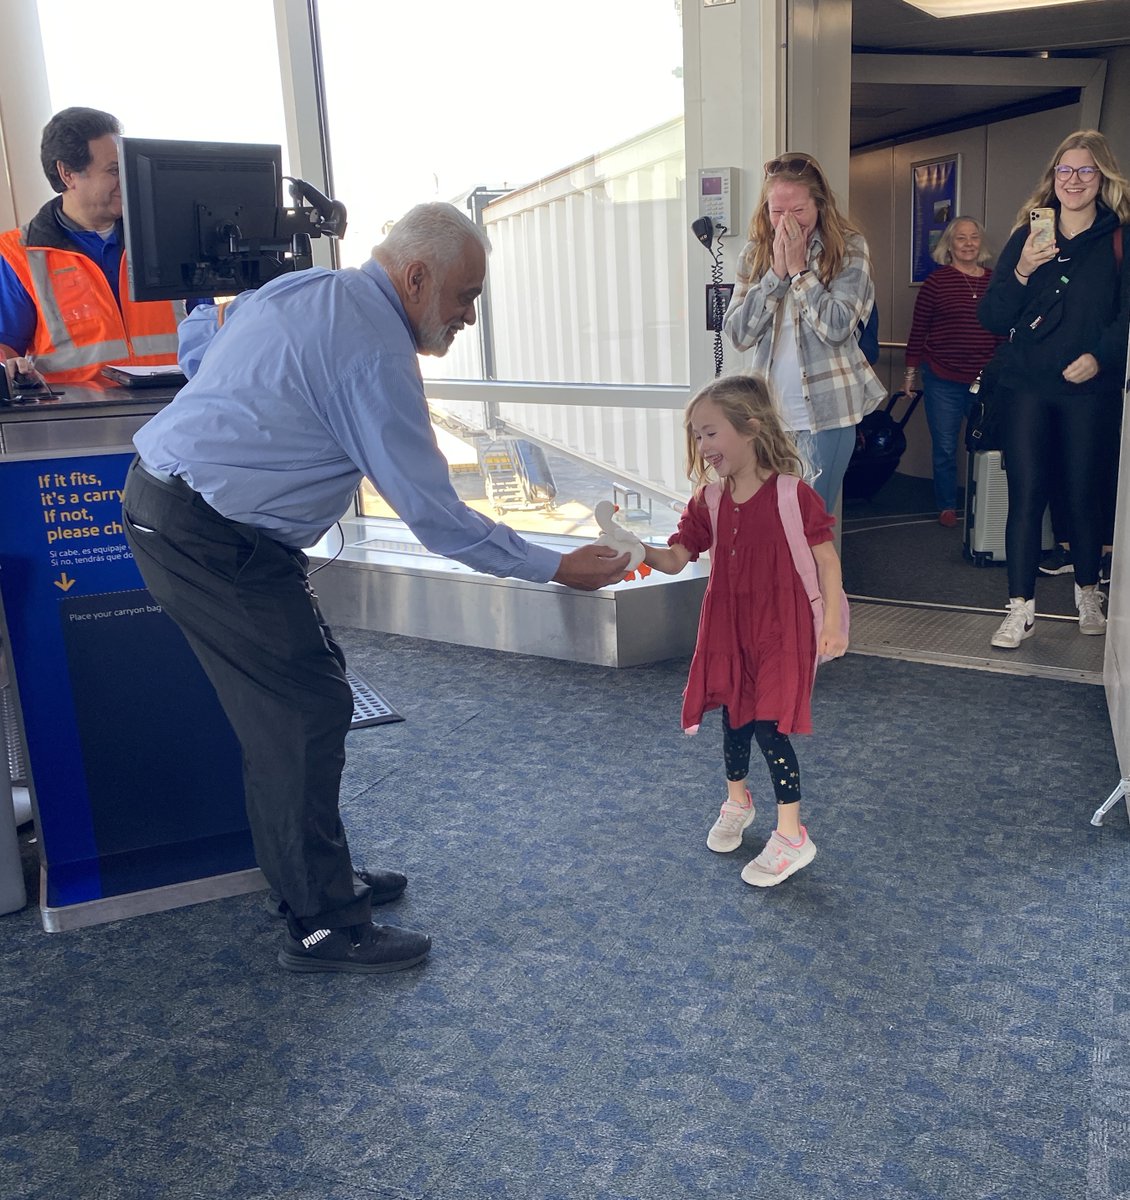 Thank you to the @SouthwestAir crew at MKE Airport for saving Lucy's Thanksgiving! Lucy accidentally left behind her favorite stuffed animal, Gracie, before they boarded their flight from MKE last week. Southwest Airlines stepped in and Gracie met Lucy at the gate when they…